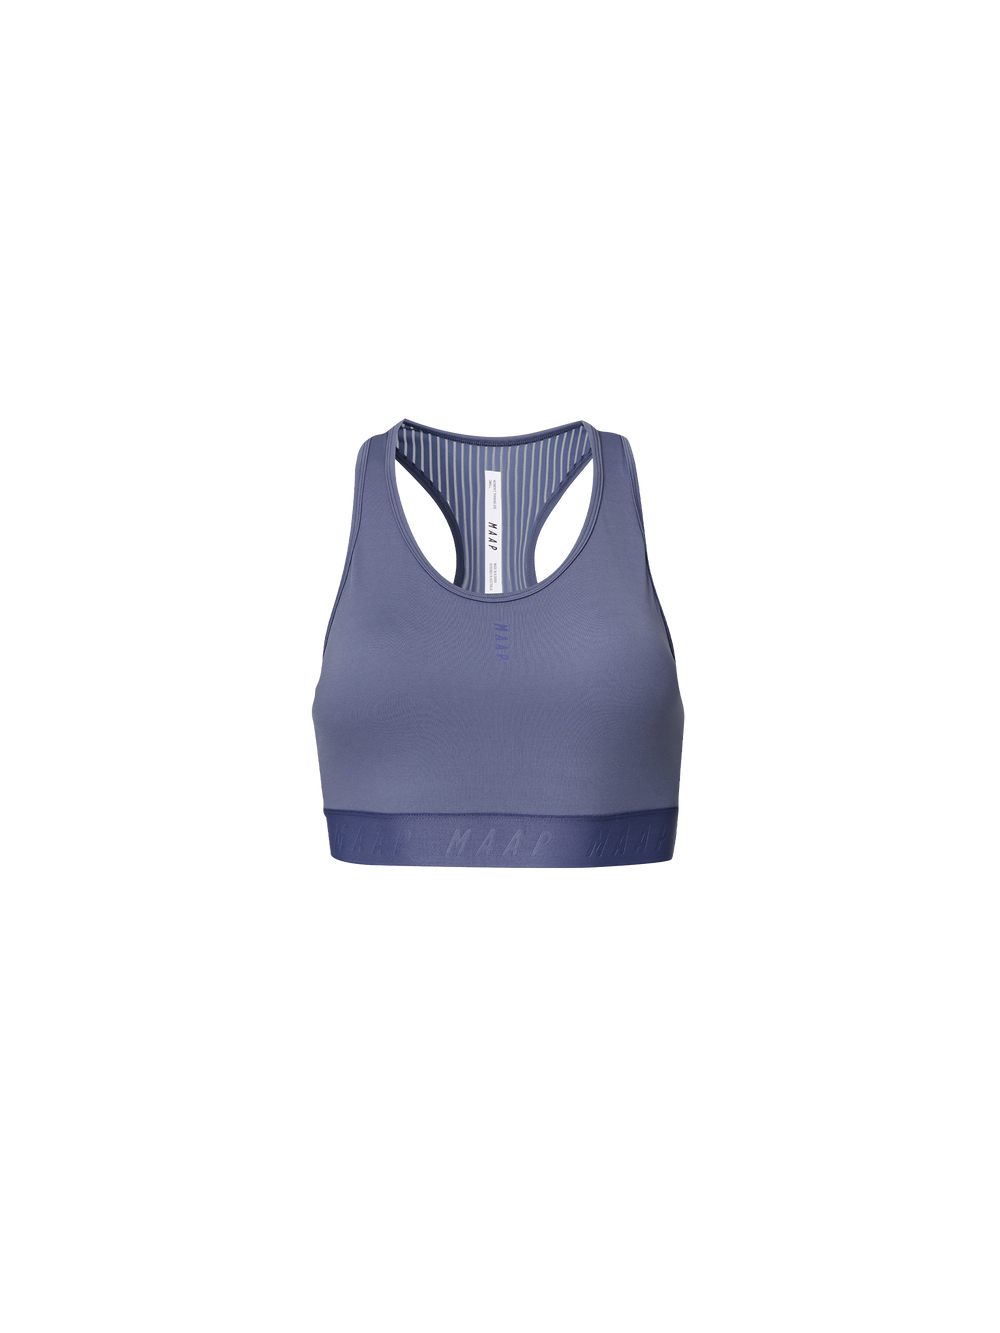 Product Image for Women's Sequence Crop